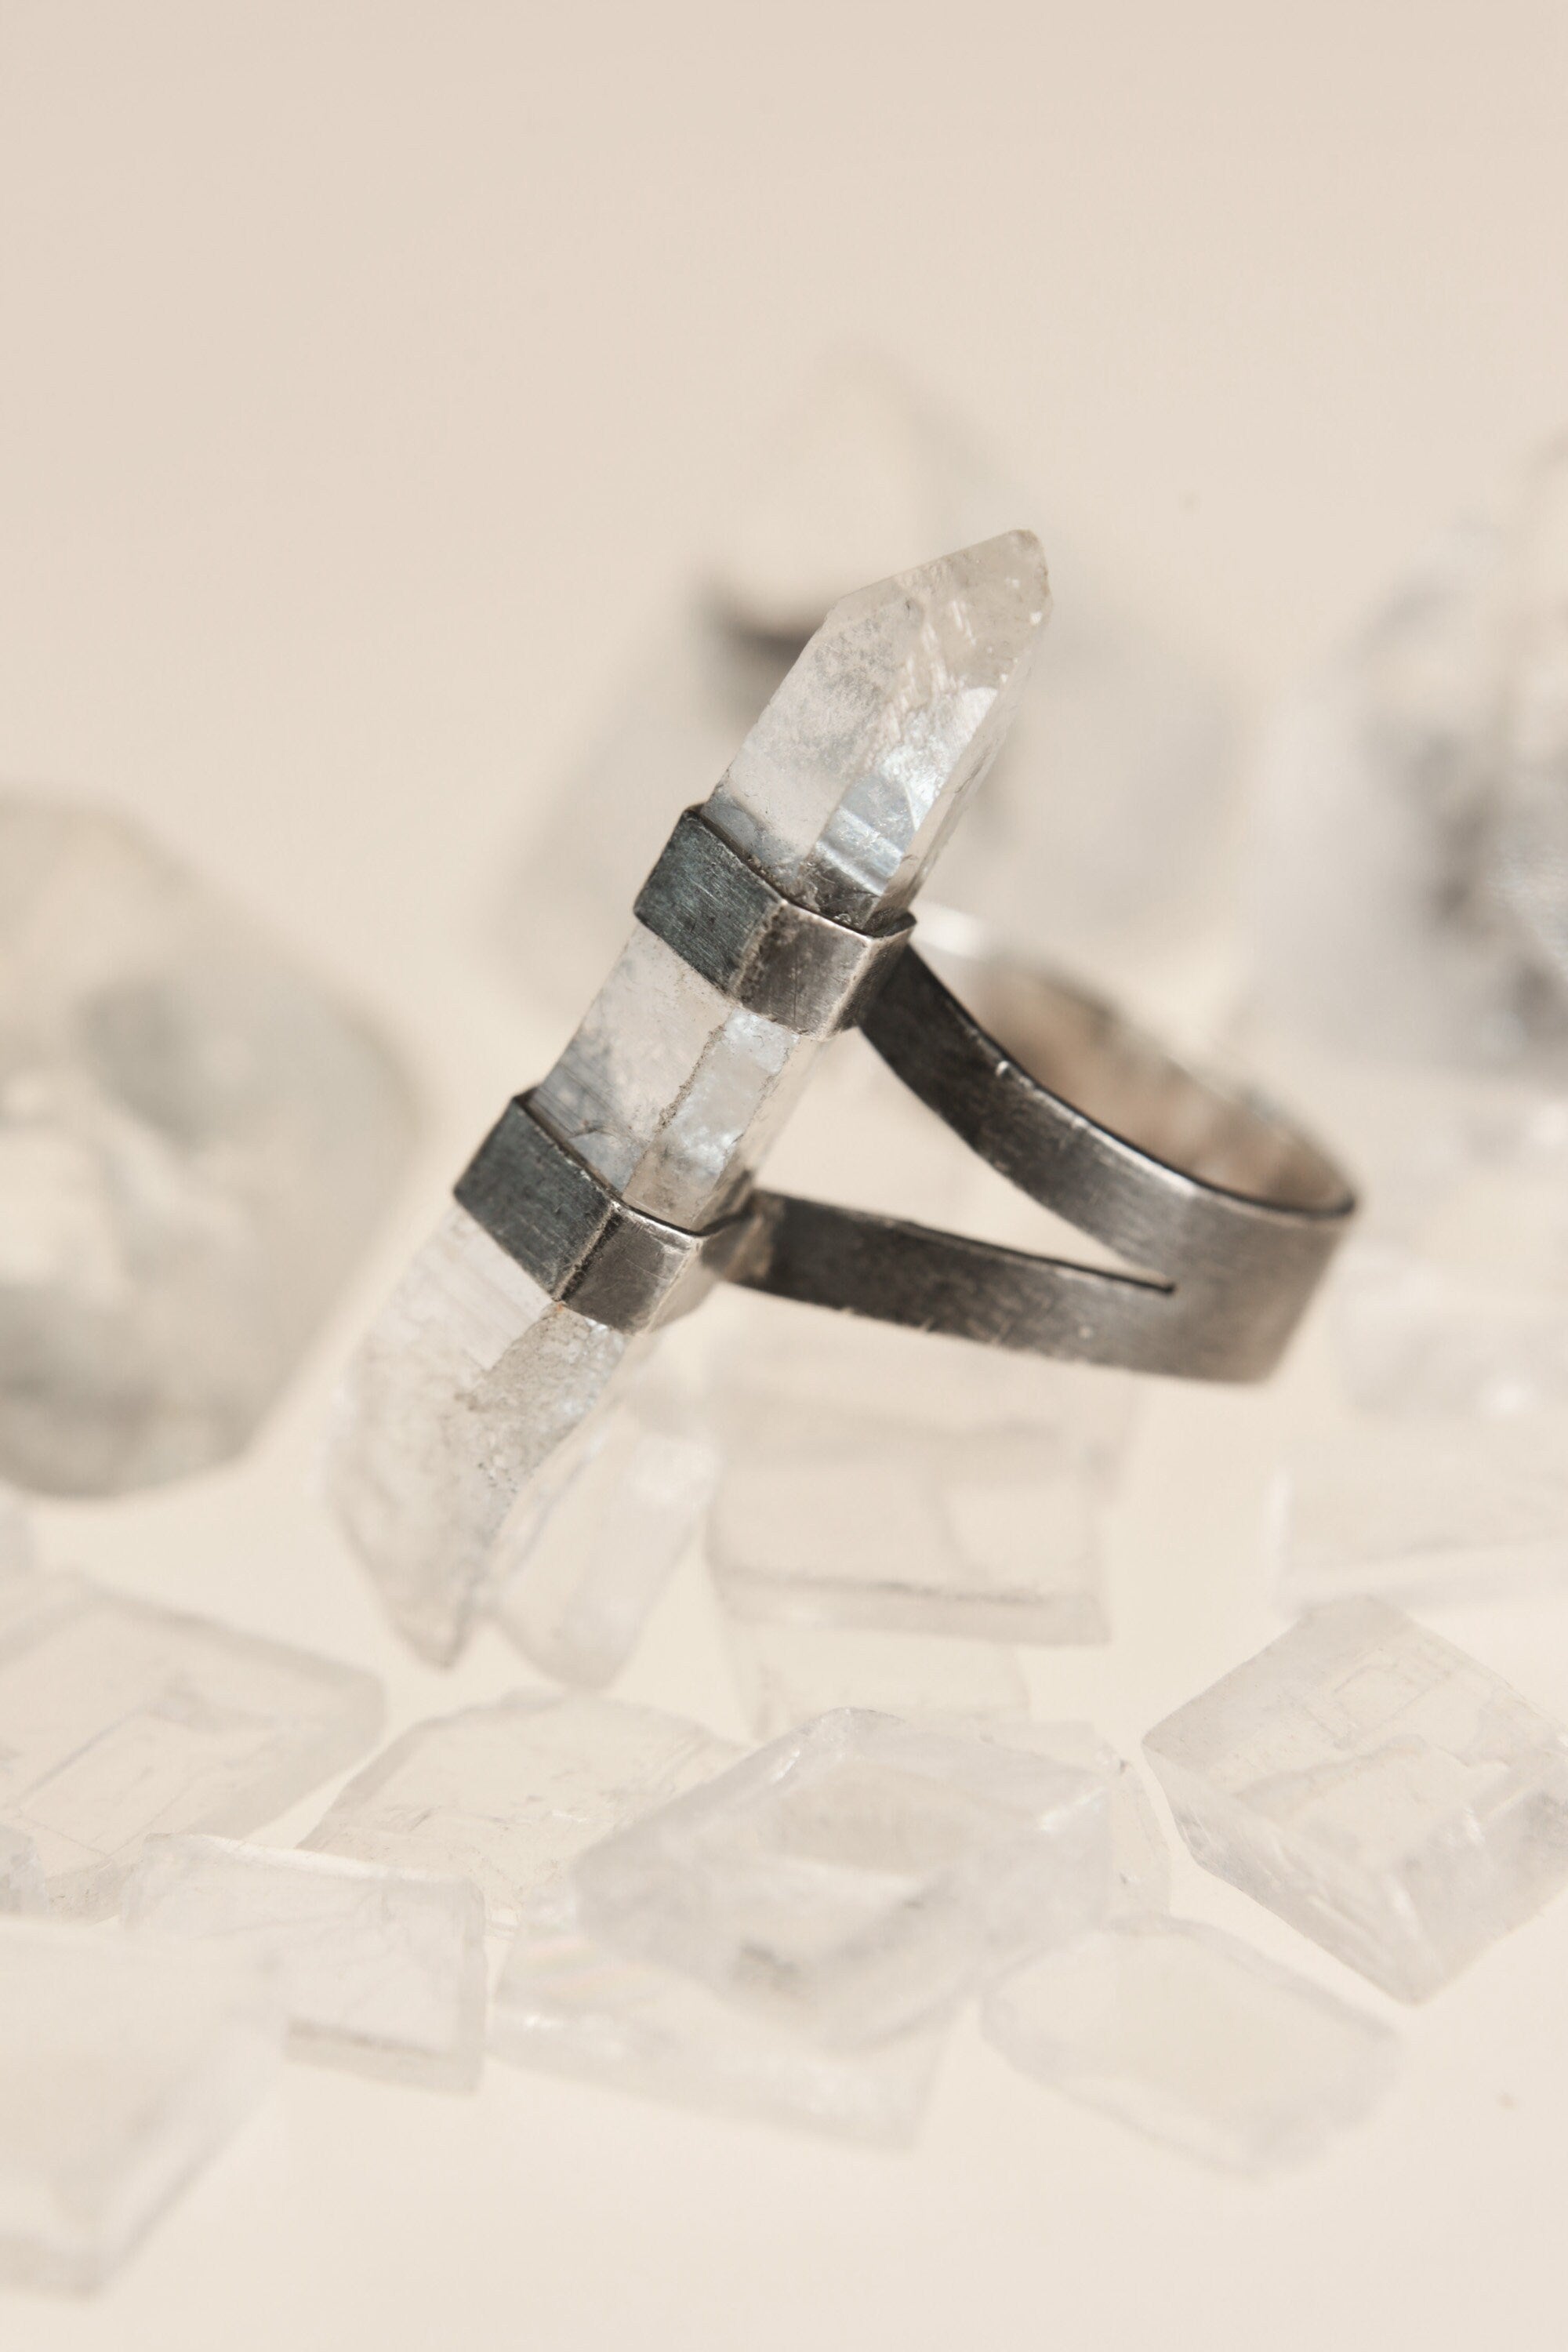 Austral Radiance: Textured & Oxidised Sterling Silver Ring with Australian Clear Quartz - Size 9 US